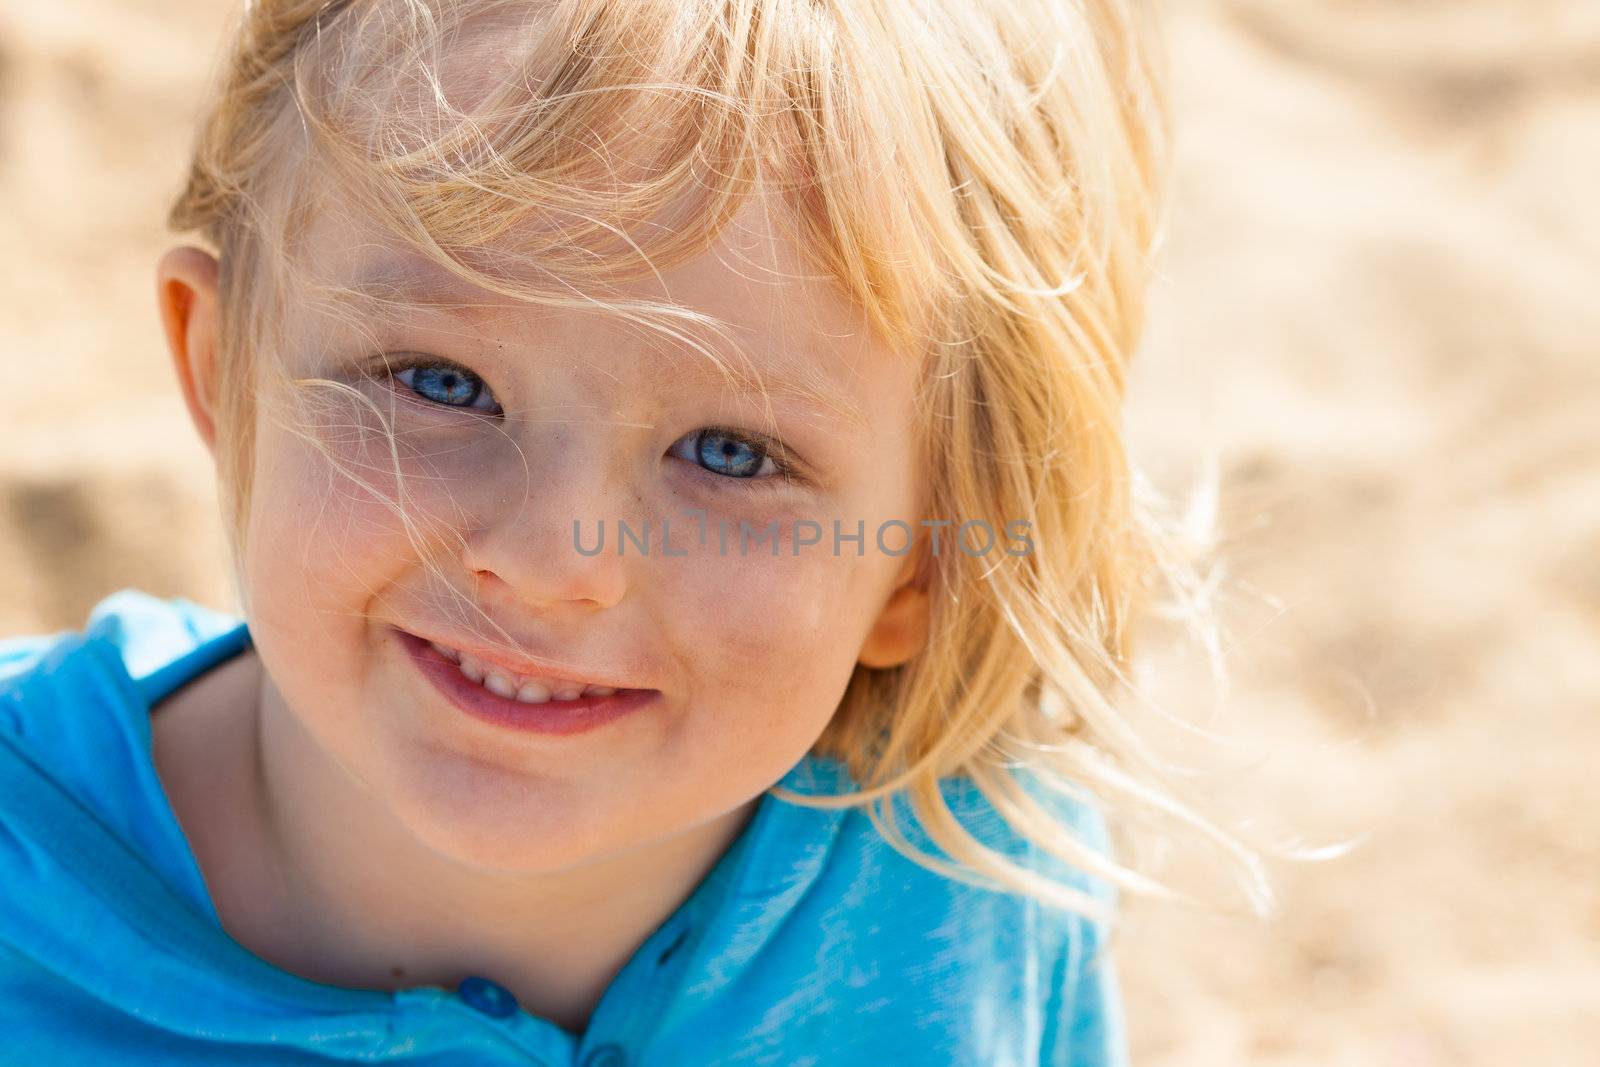 Close-up portrait of a cute smiling boy playing outdoors.